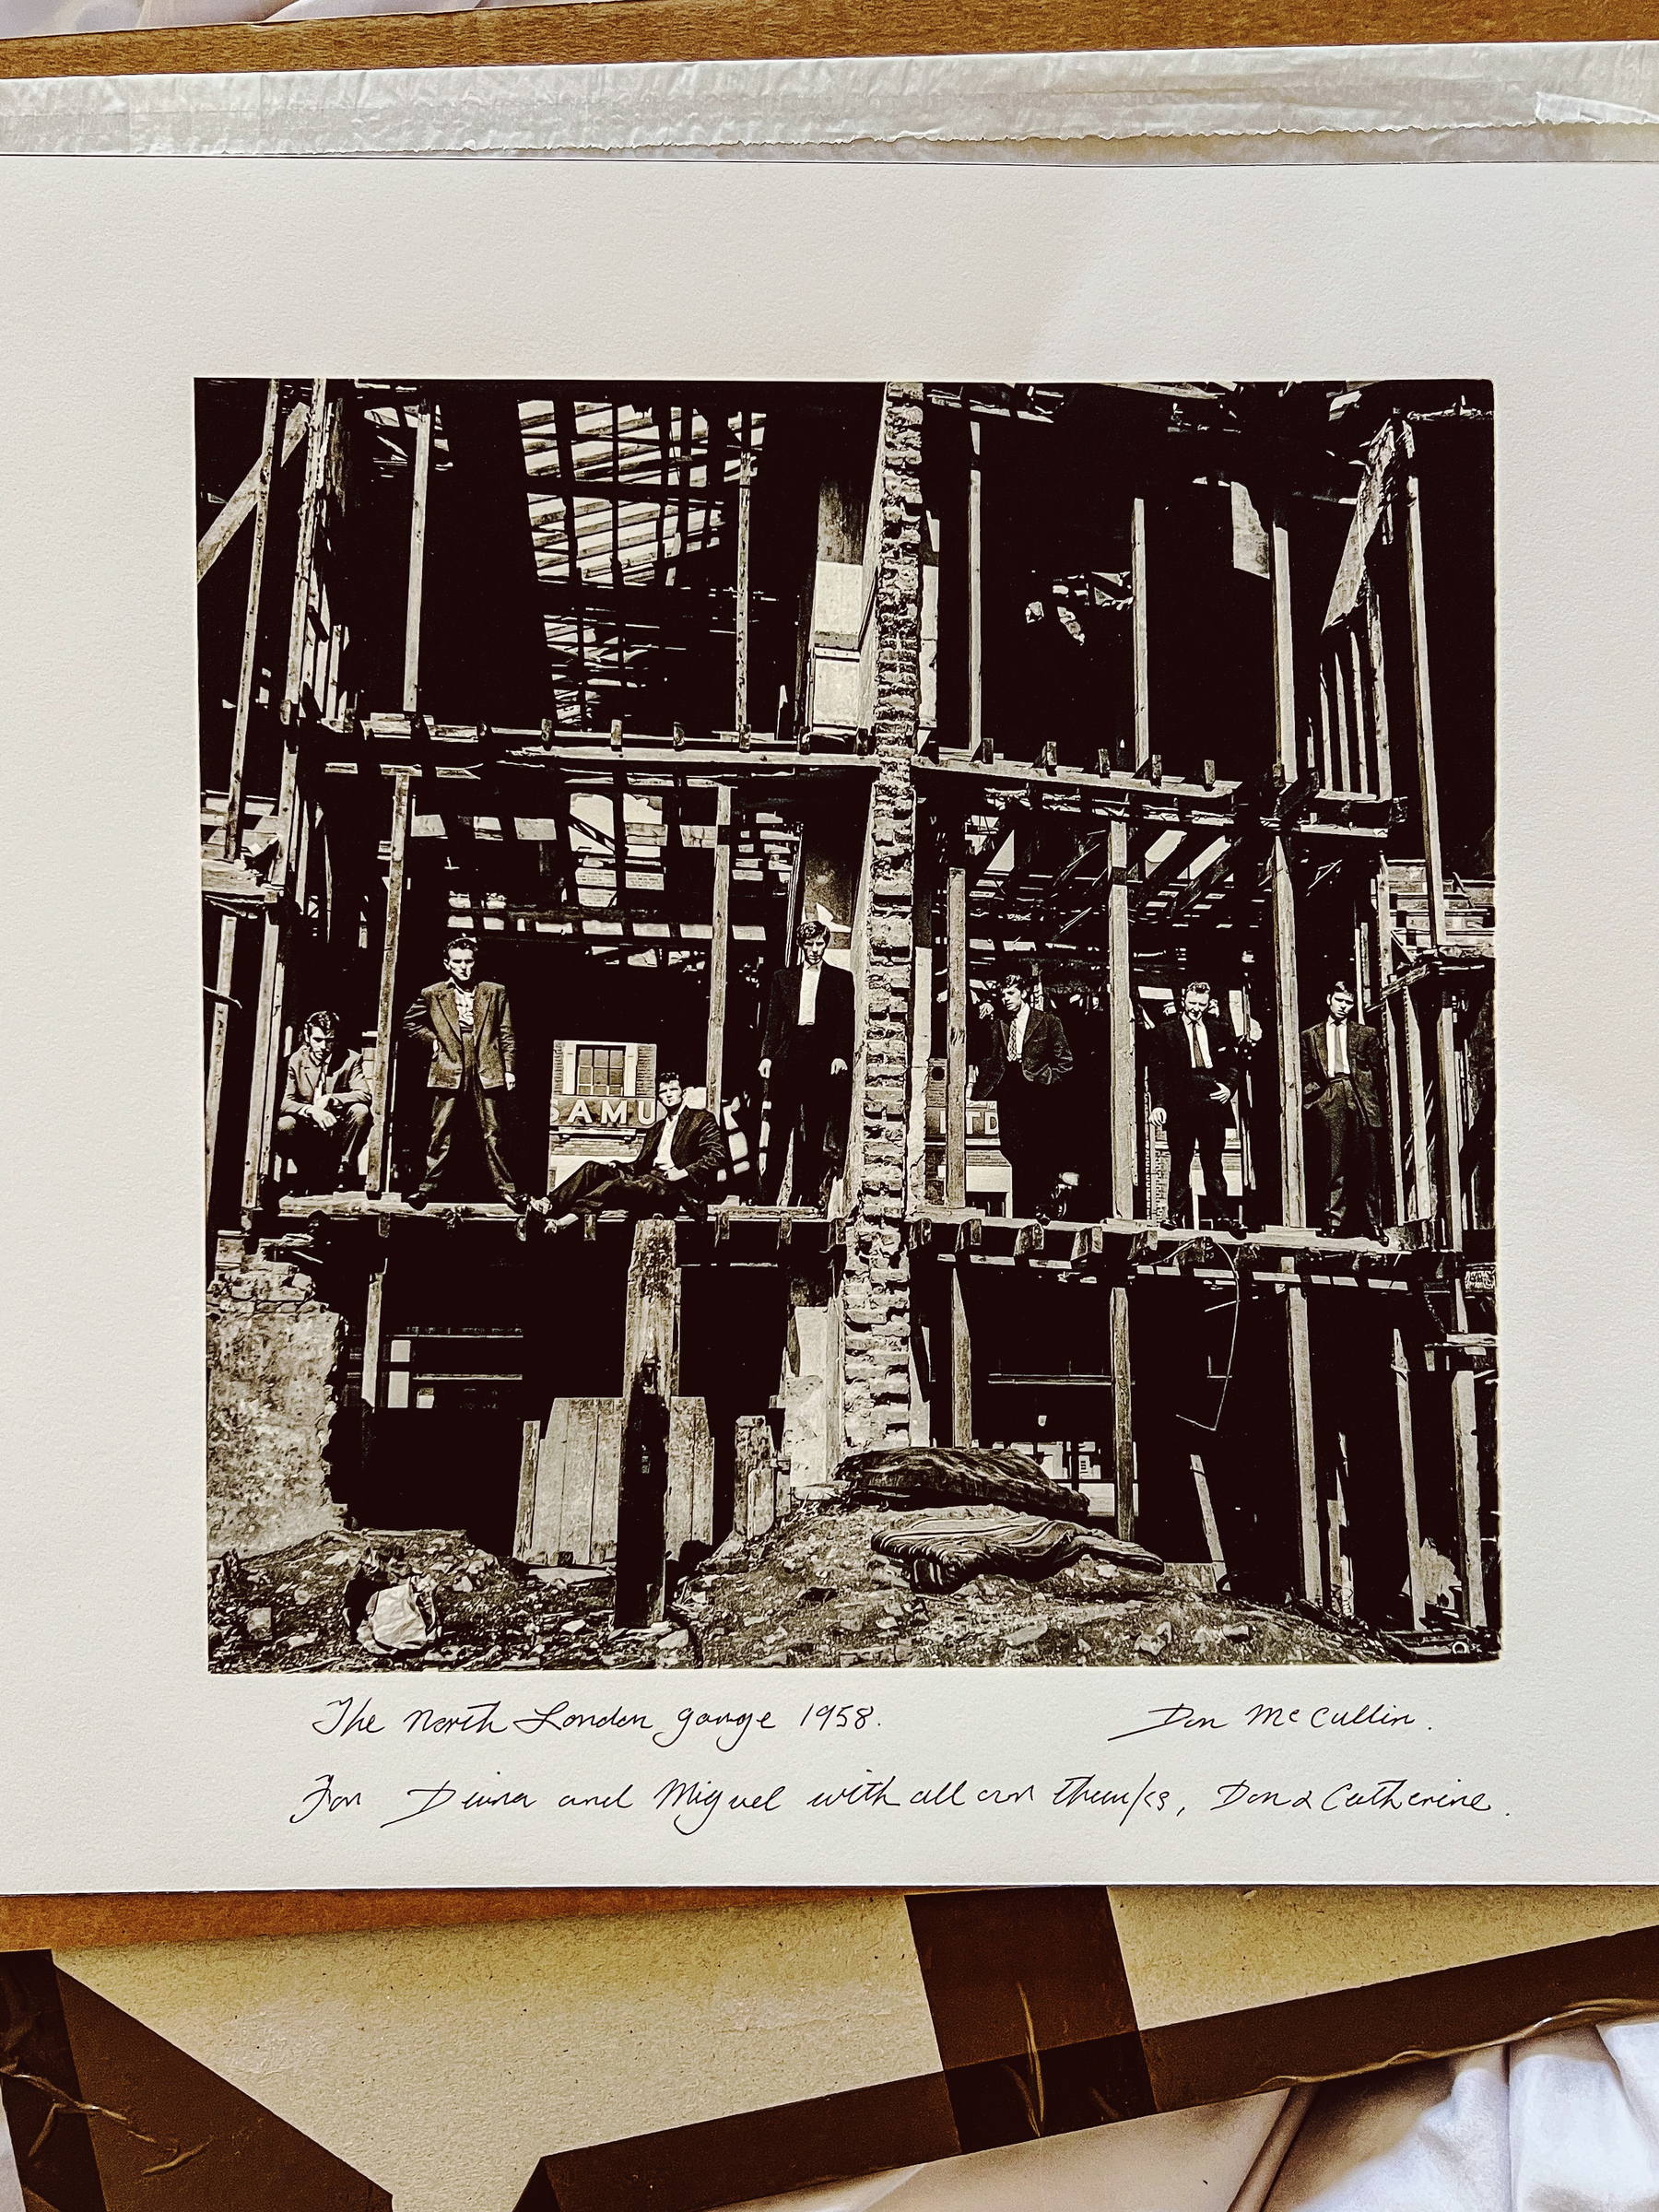 A black and white print, of a famous Don McCullin photo. Men are standing in a gutted building. 